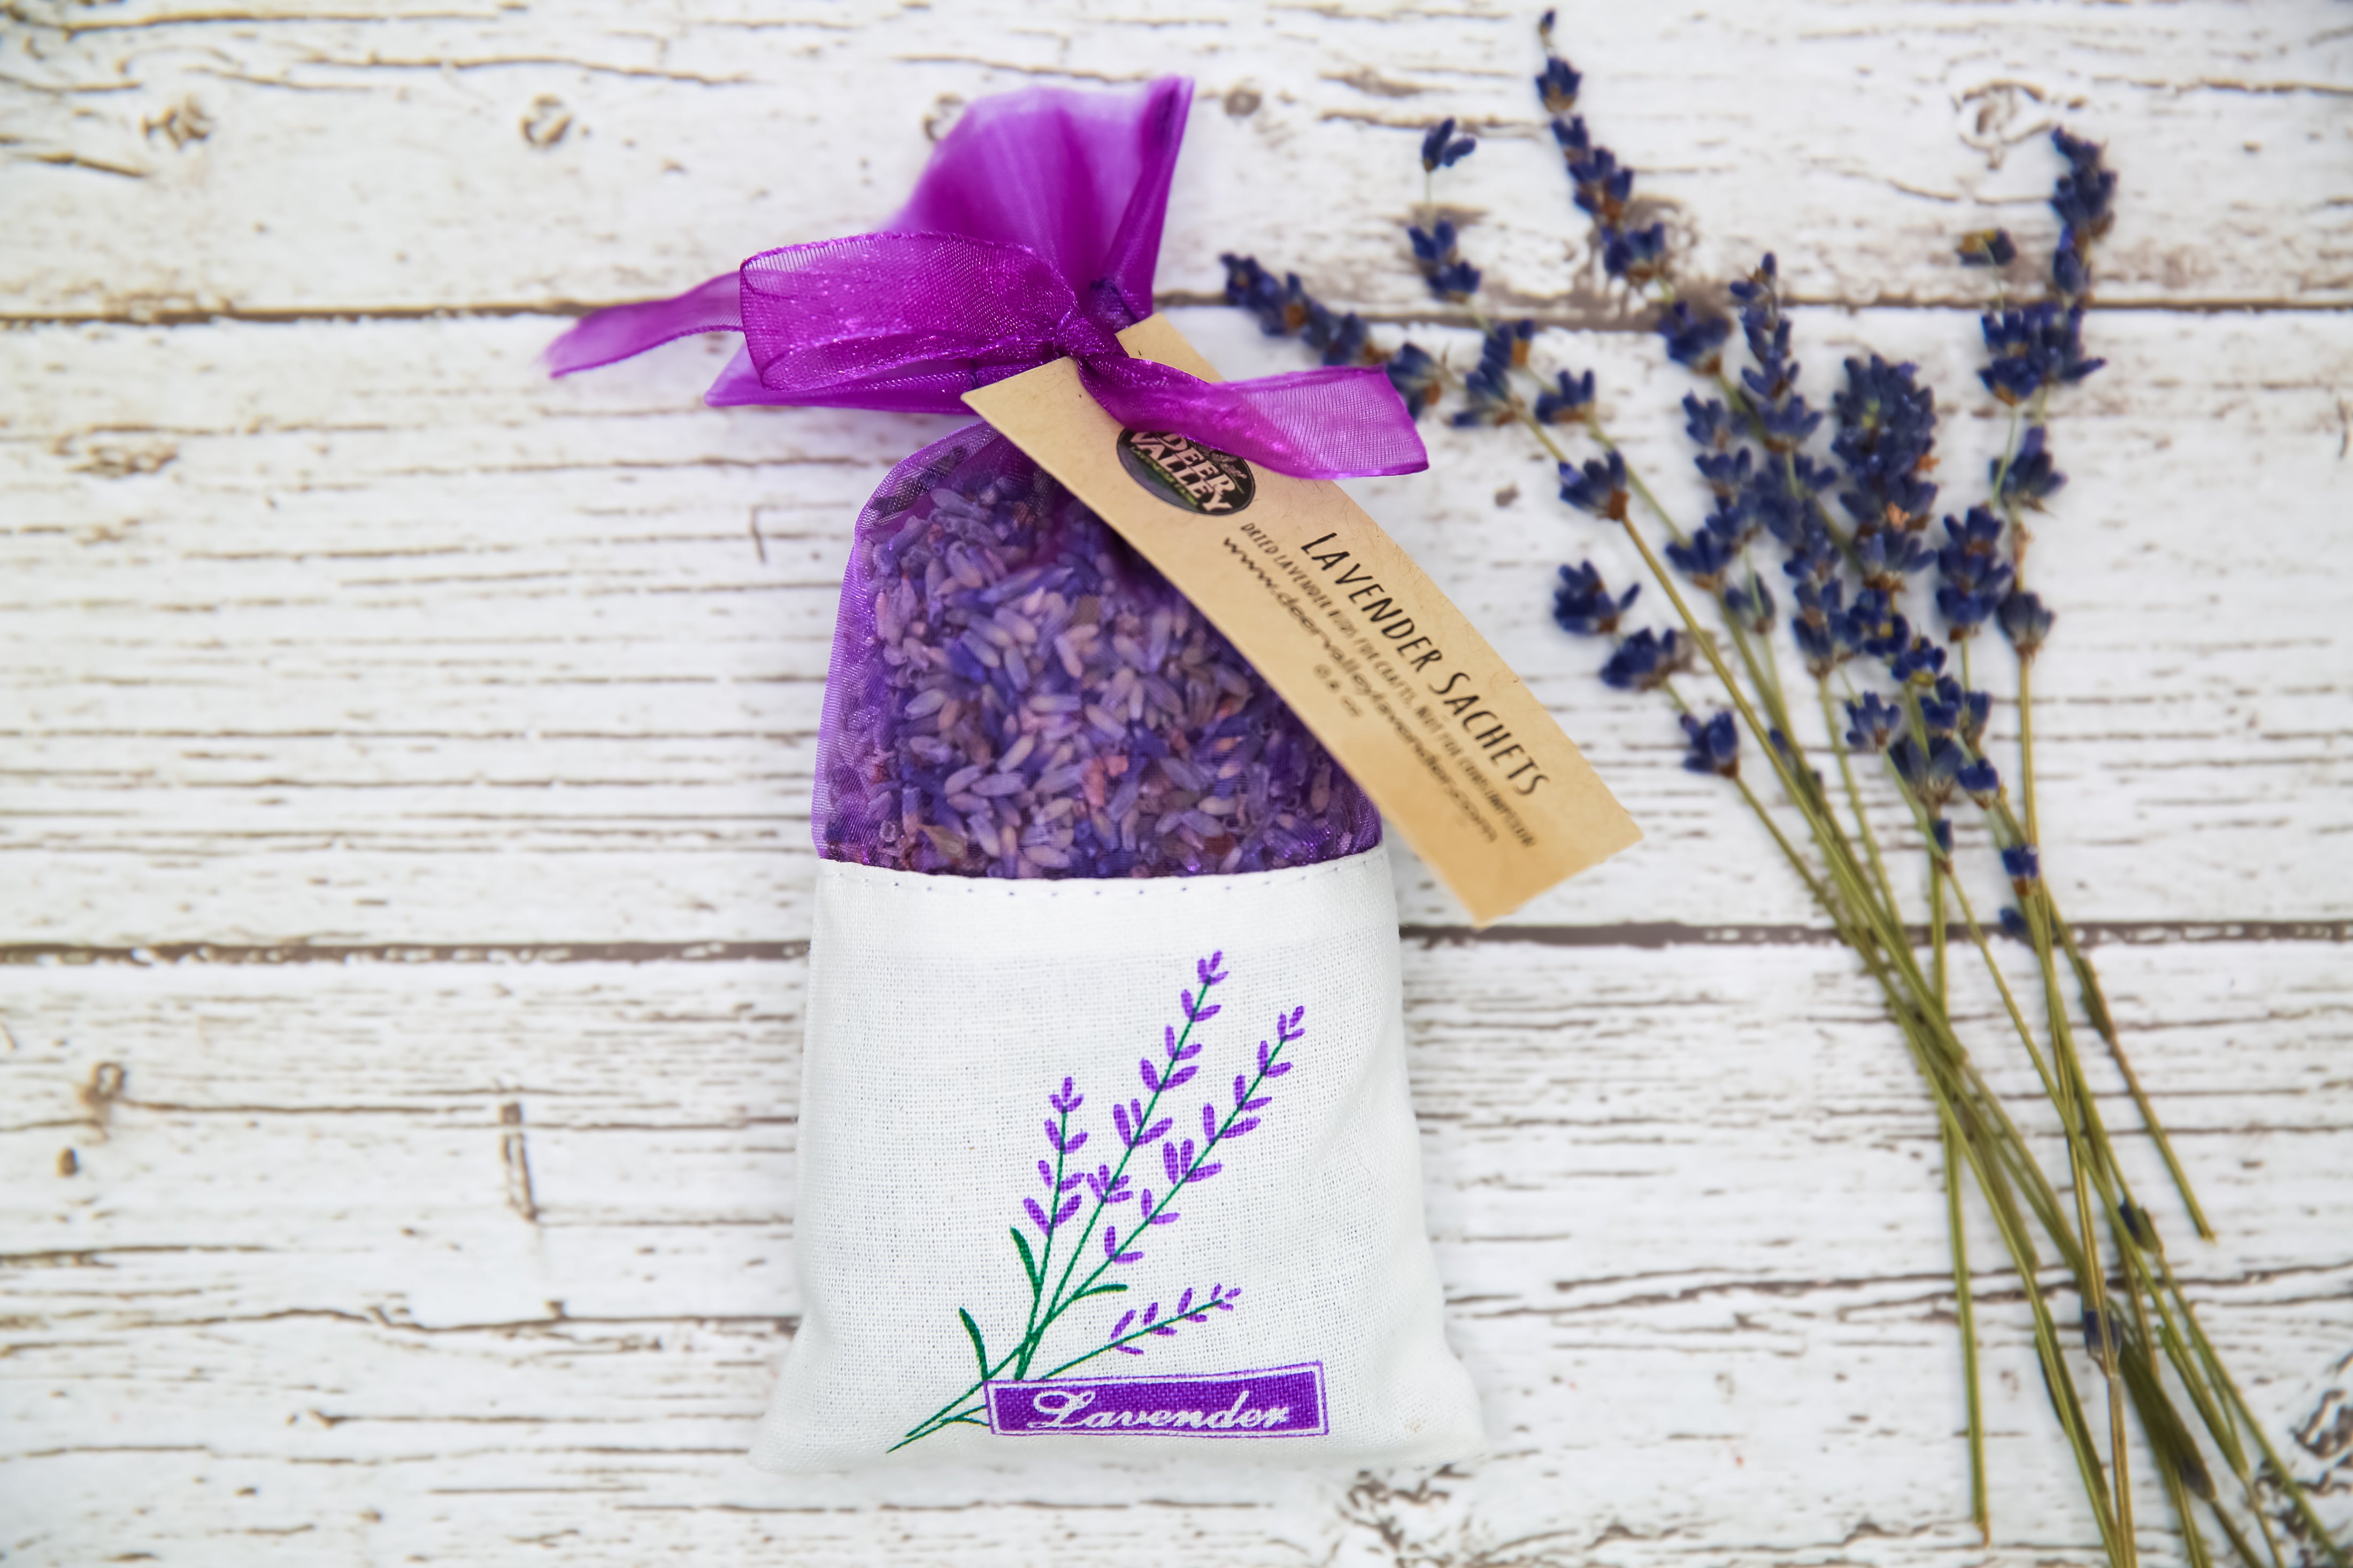 Bouquet of dry lavender flowers and sachets filled with dried lavender  Stock Photo by ©ChamilleWhite 140011974